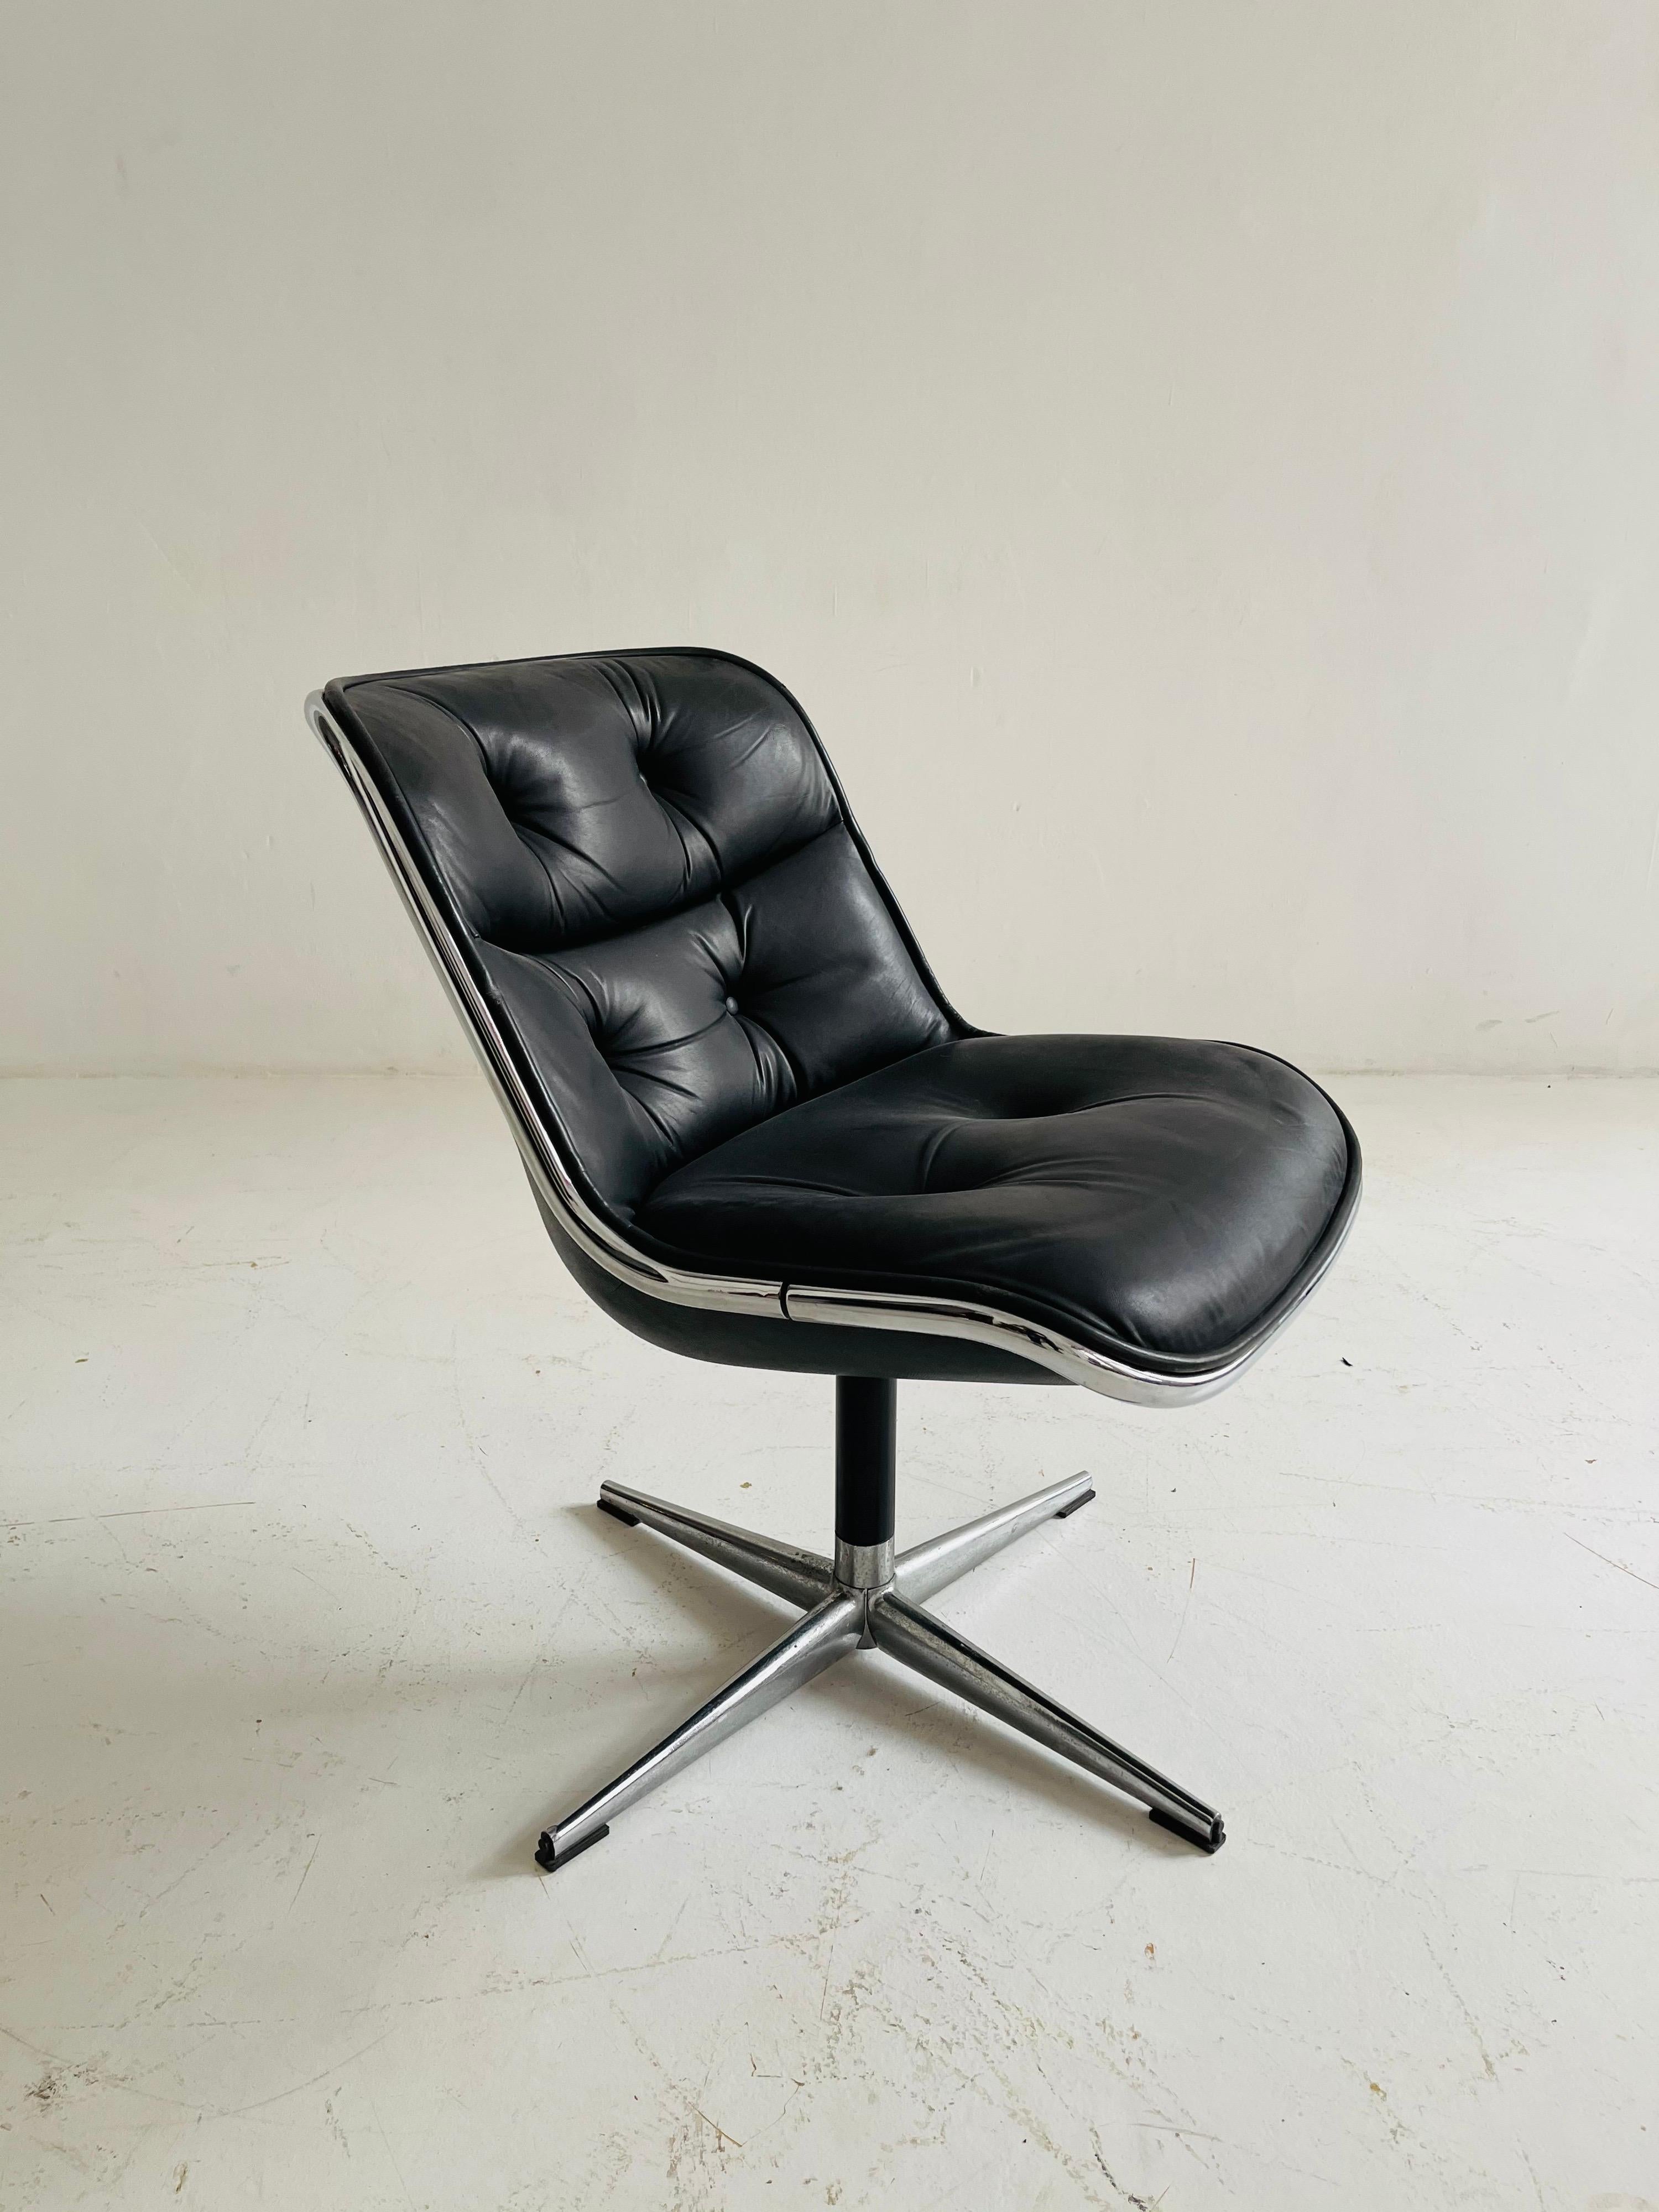 Pollack Executive Chair by Charles Pollack for Knoll Set of Six Leather, 1960s For Sale 7